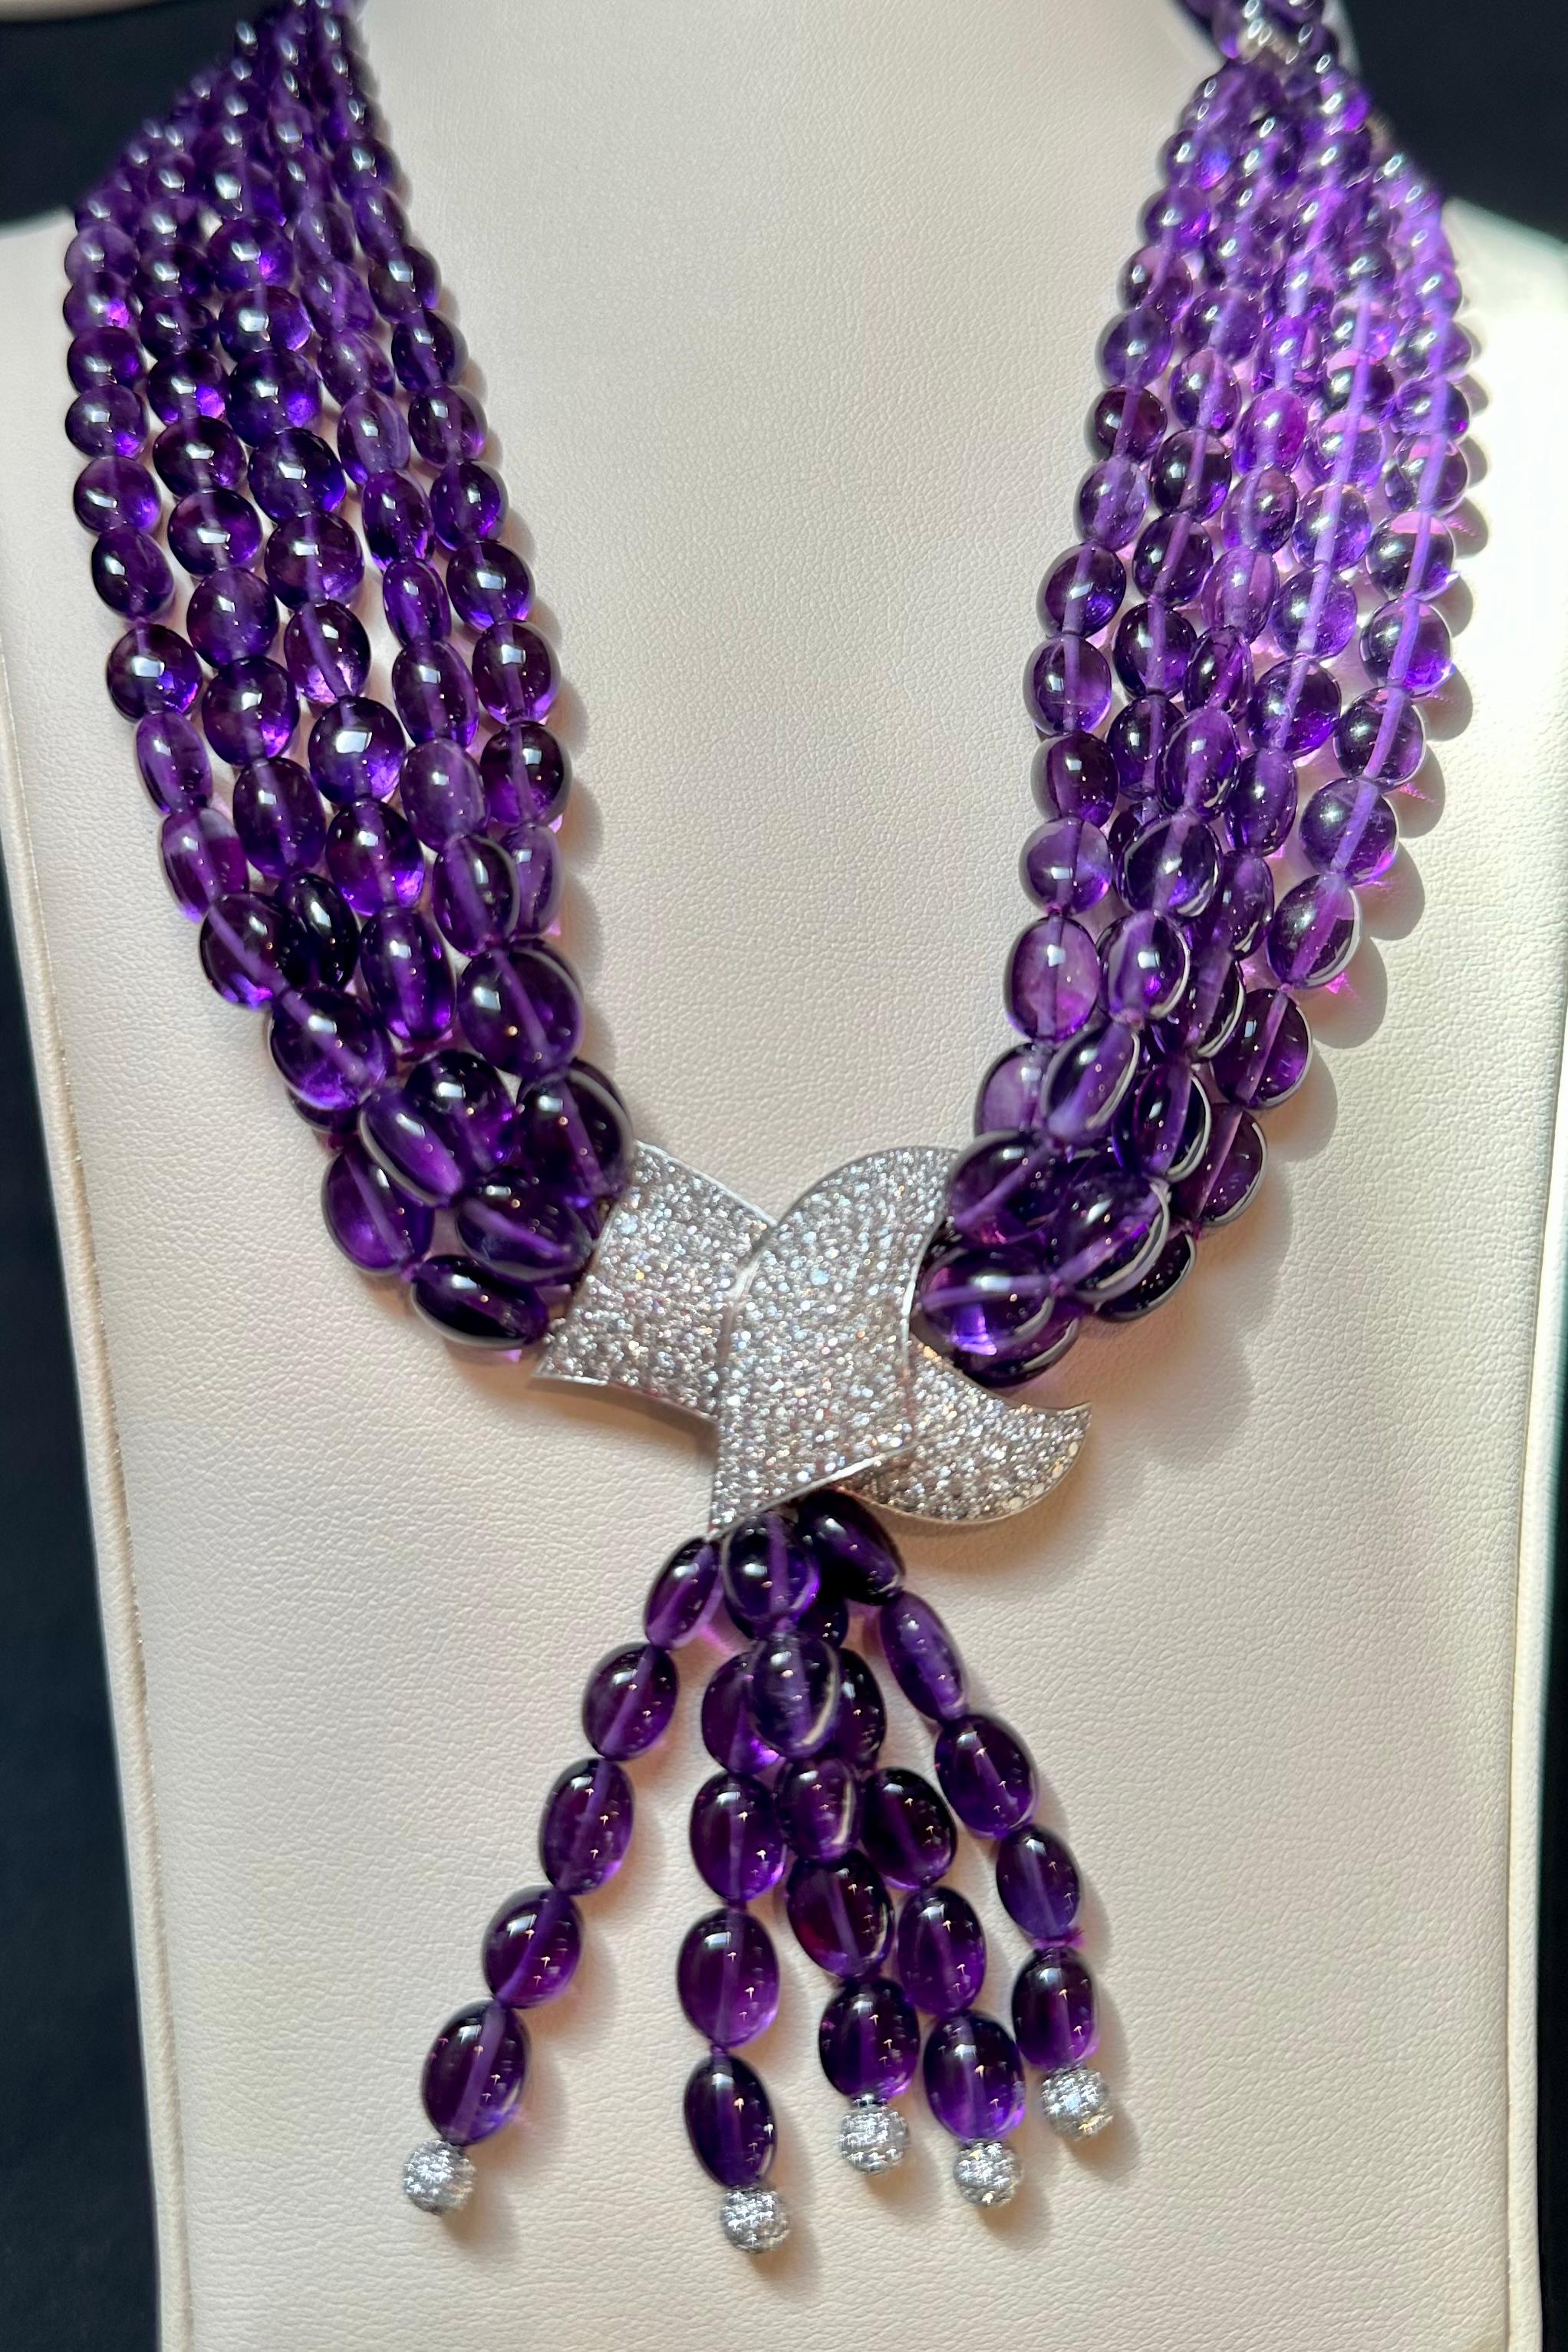 700 Ct Natural Amethyst Multi Layer Bead Necklace in Platinum with 9 Ct Diamonds For Sale 9